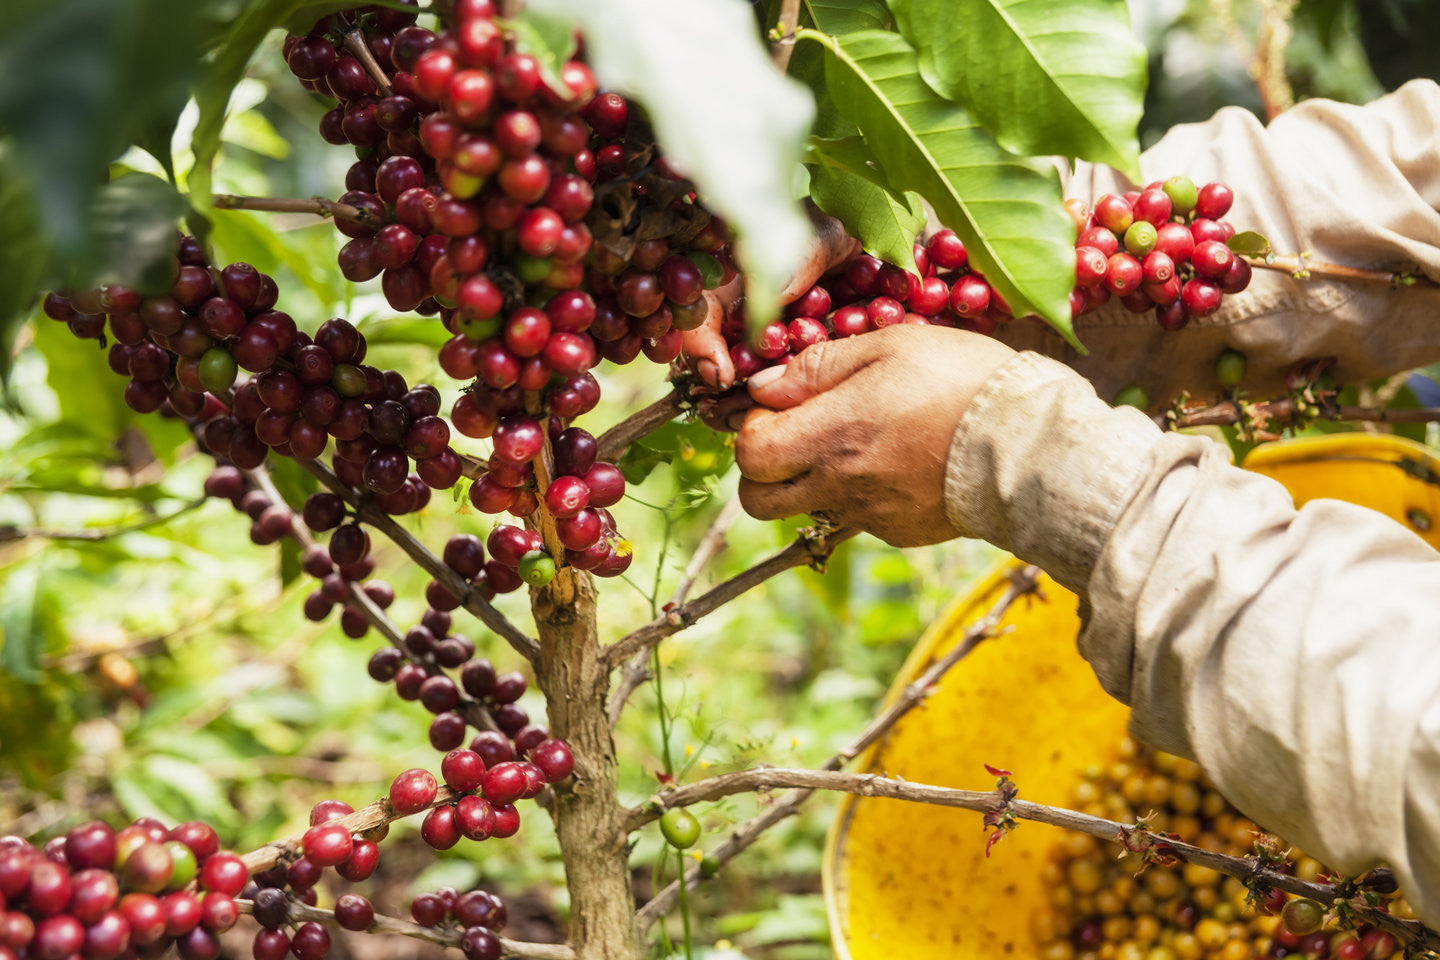 Today we look at Colombian FNC coffee beans and what makes them great!